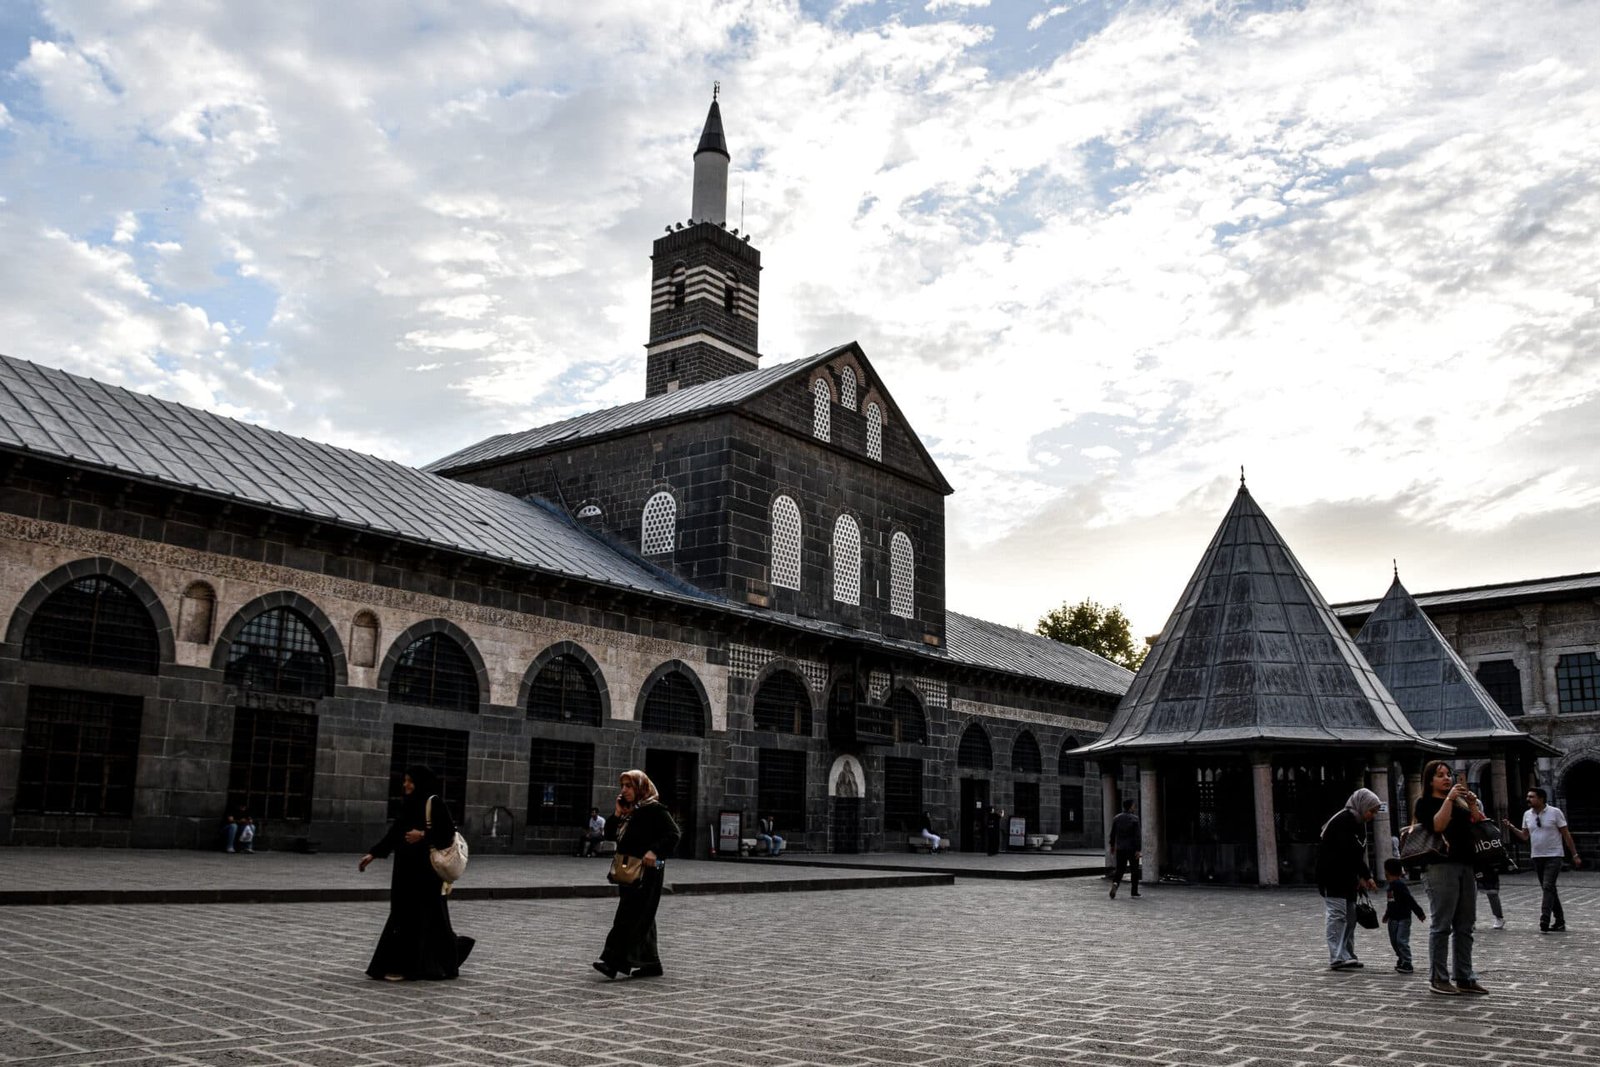 two women walk across the main square of Diyarbakir Great Mosque